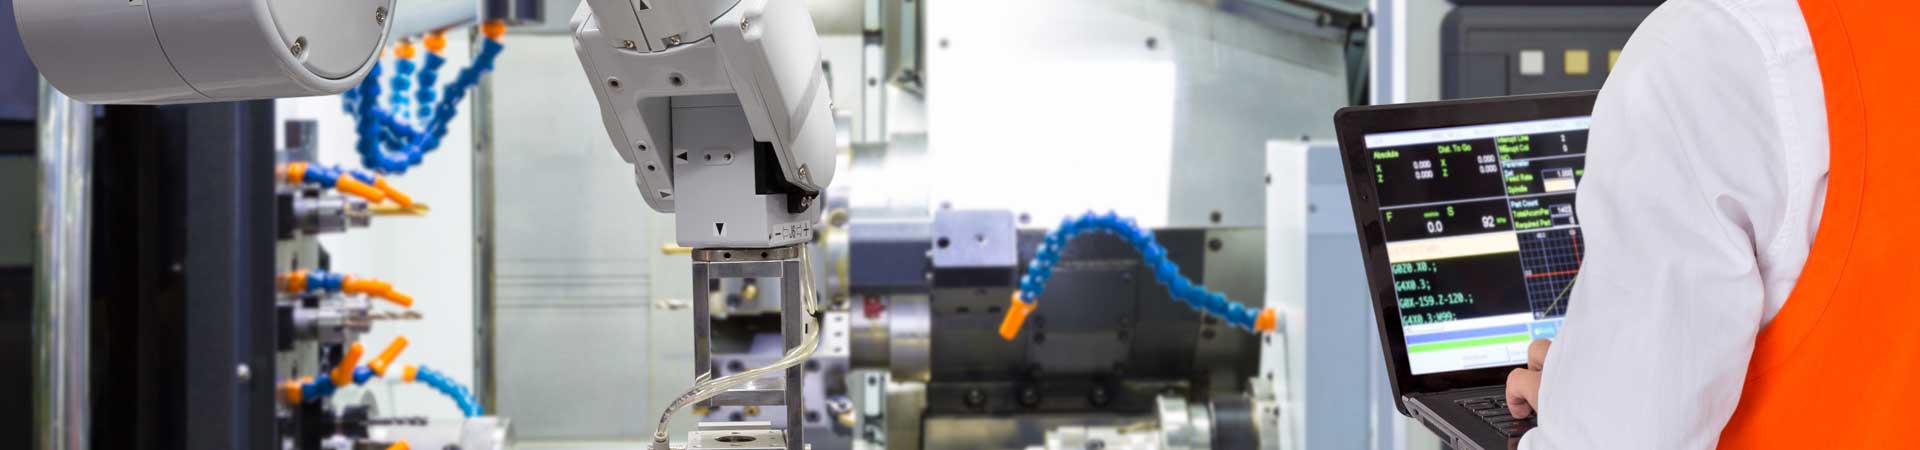 Secure Revamp of 20-Year-Old Manufacturing Machine Control Software